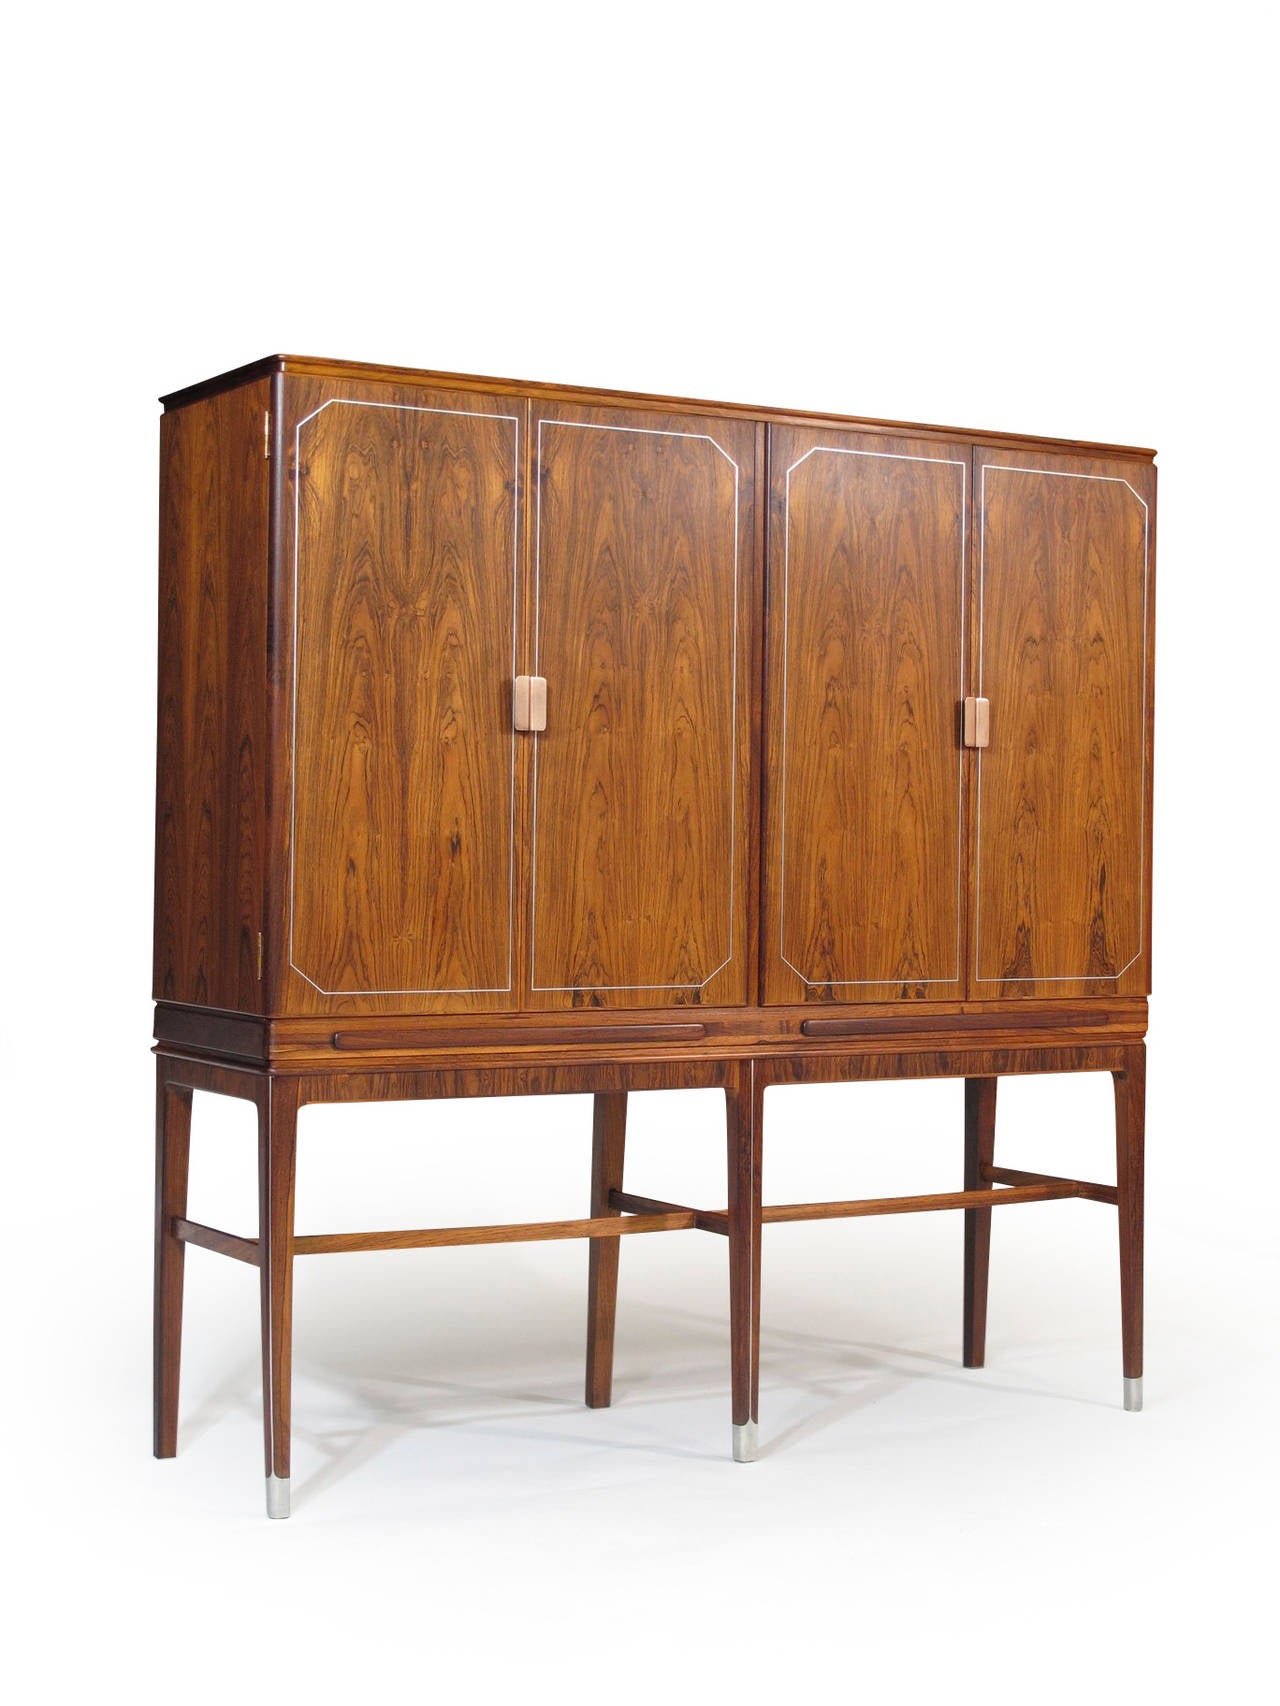 Handcrafted rosewood sideboard by master cabinetmaker Georg Kofoed. Rosewood with book matched doors with copper pulls surrounded by eight-carat white gold plate over copper inlay. Underneath the doors, two pull-out trays are released with the press